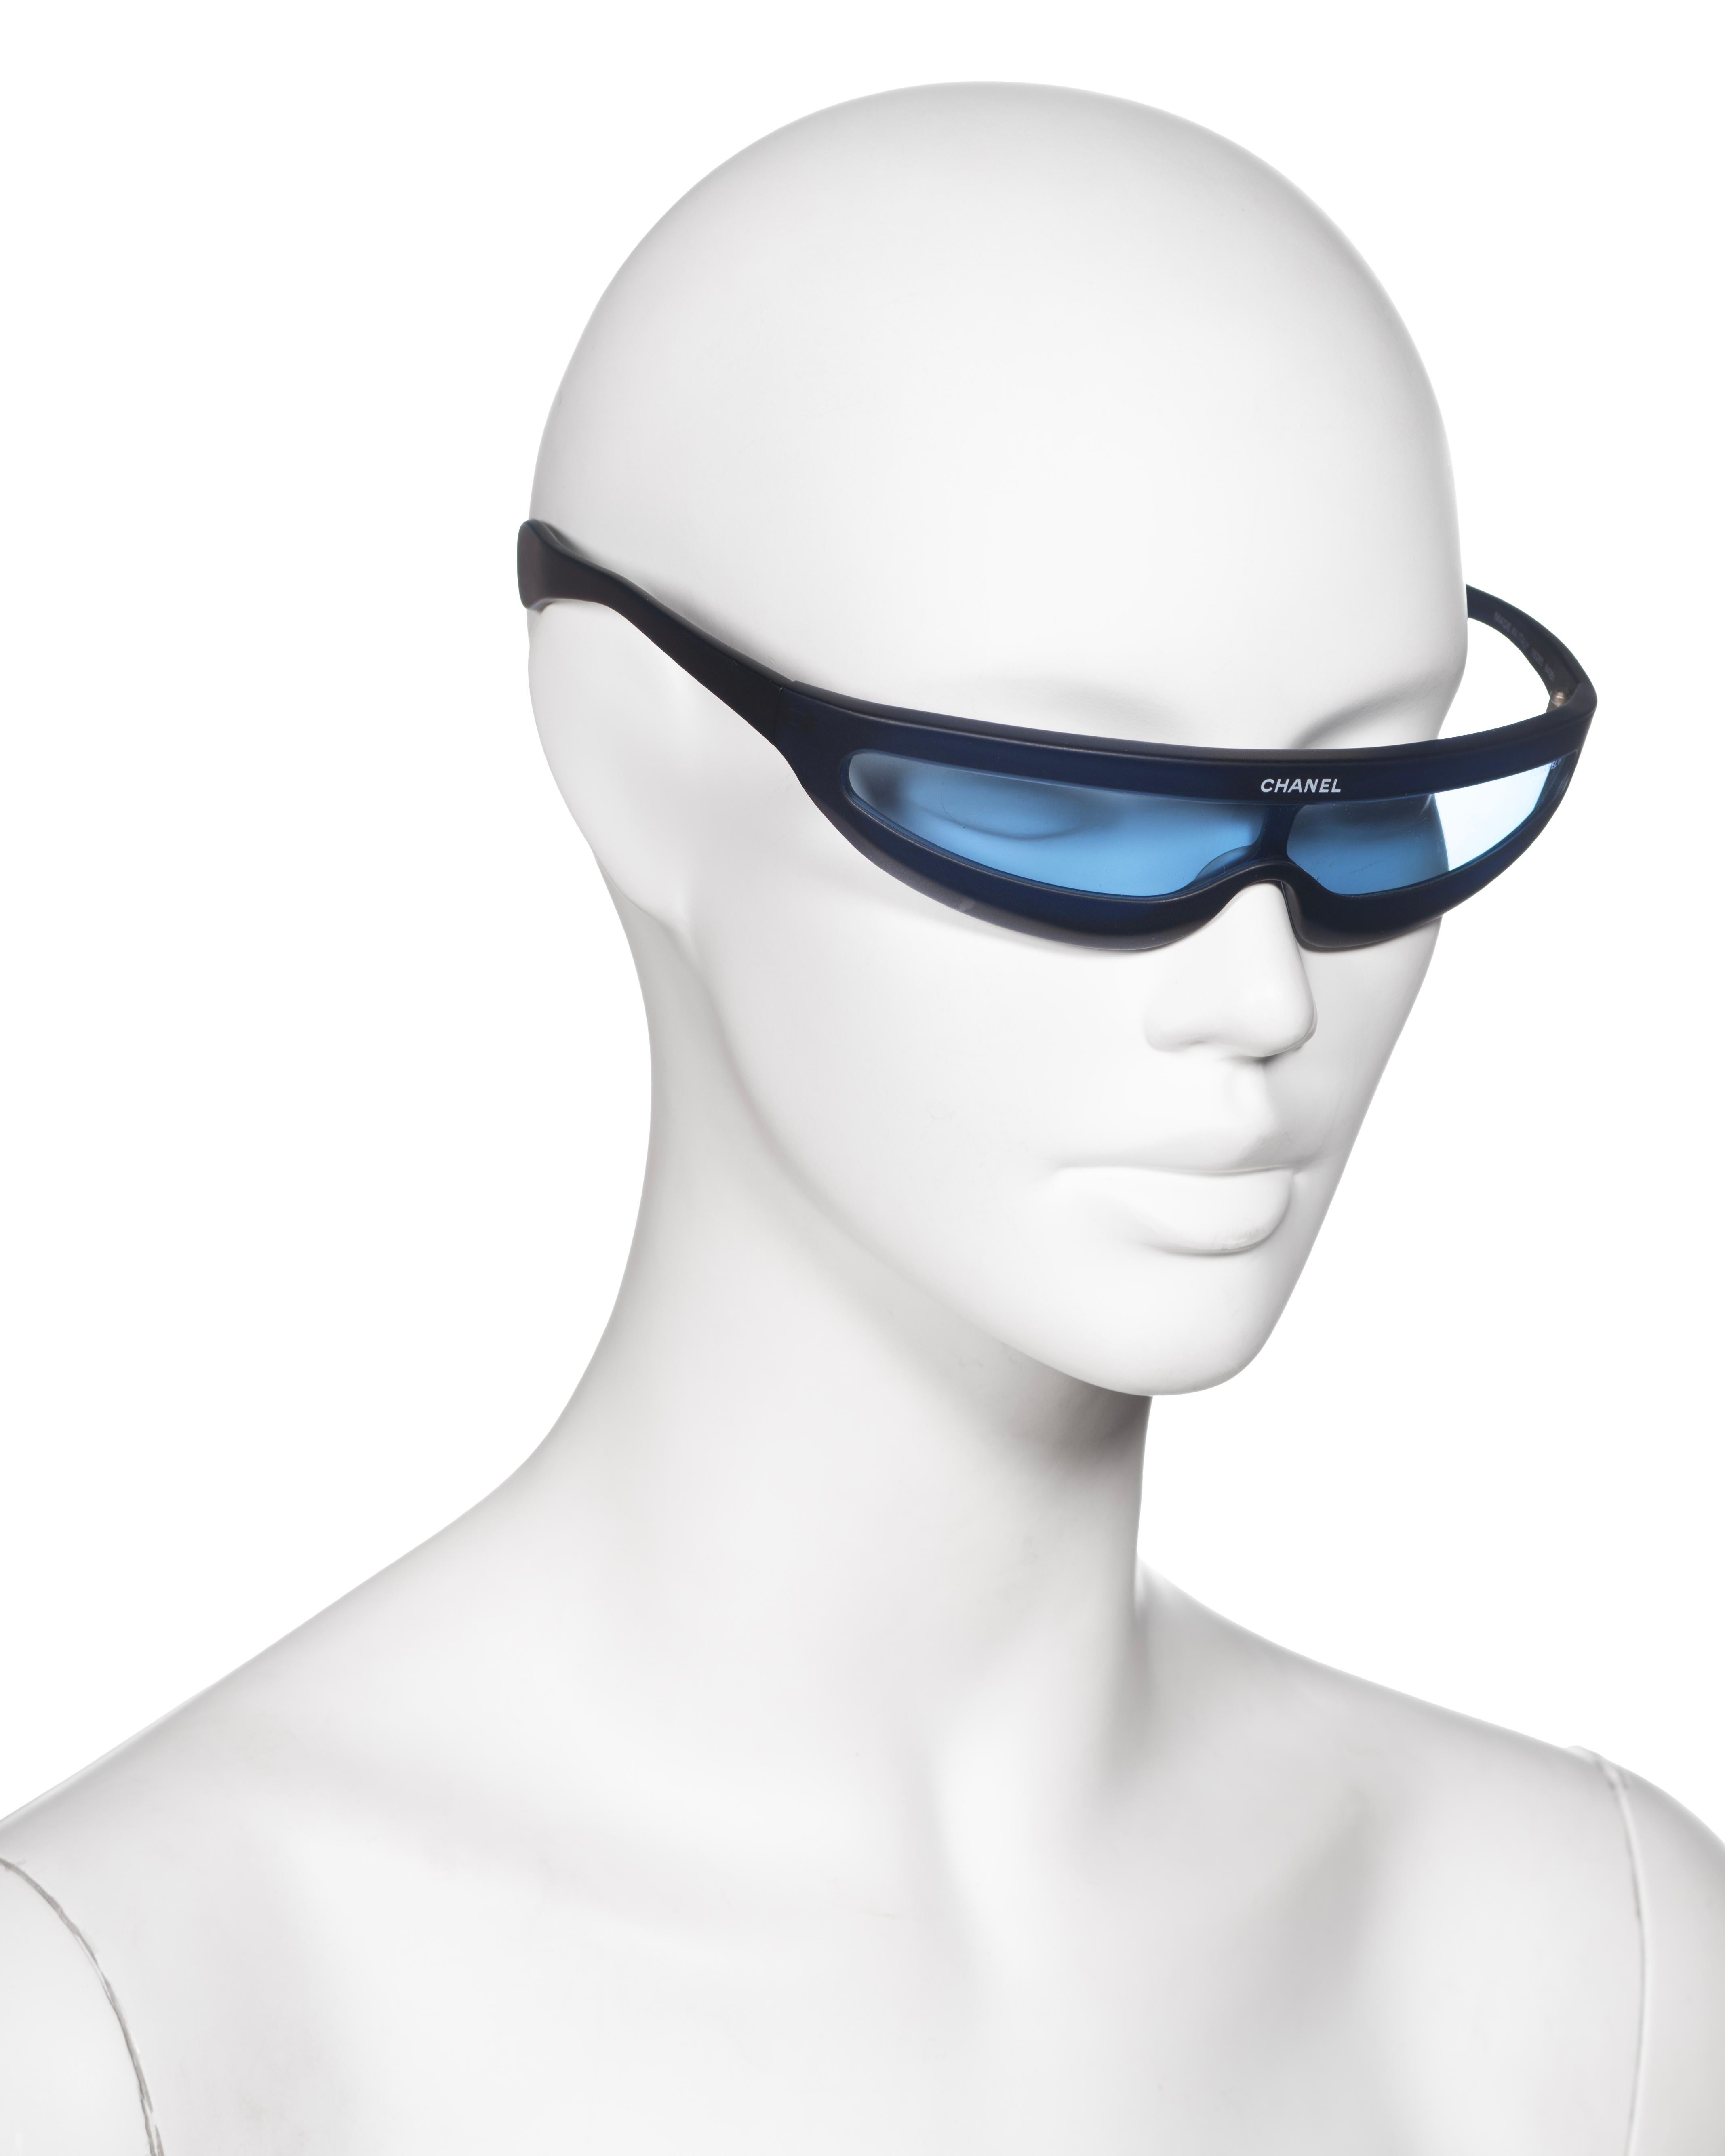 Chanel by Karl Lagerfeld Blue Monolens Sunglasses, ss 2001 1